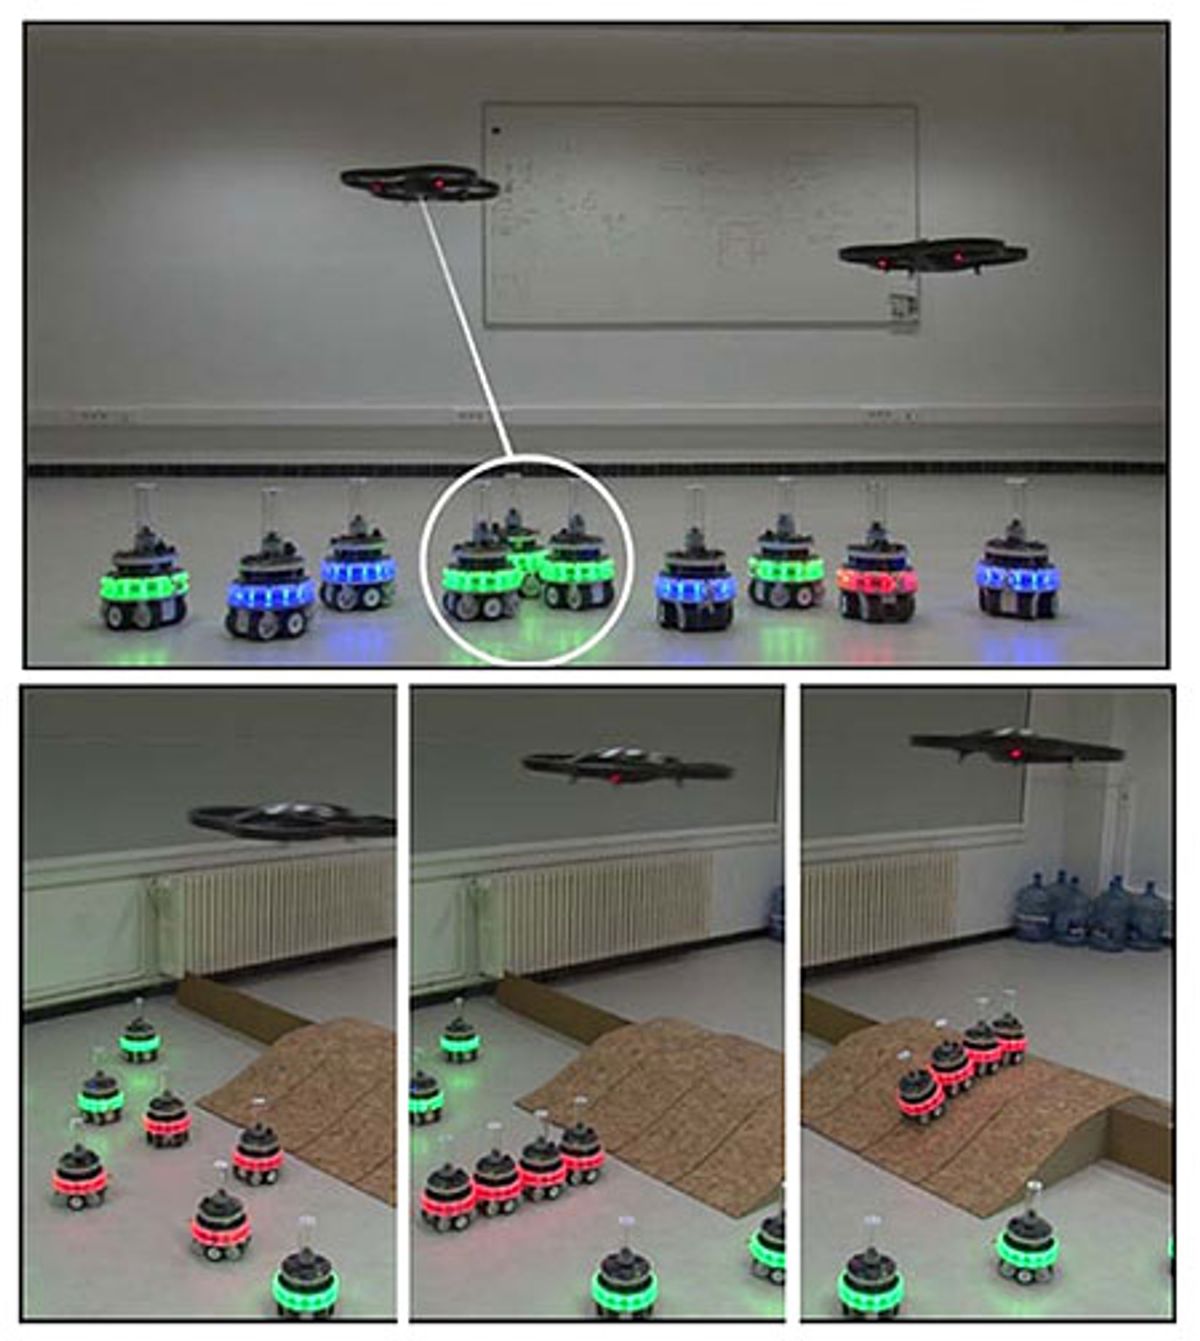 AR Drone Helps Swarm of Self-Assembling Robots to Overcome Obstacles